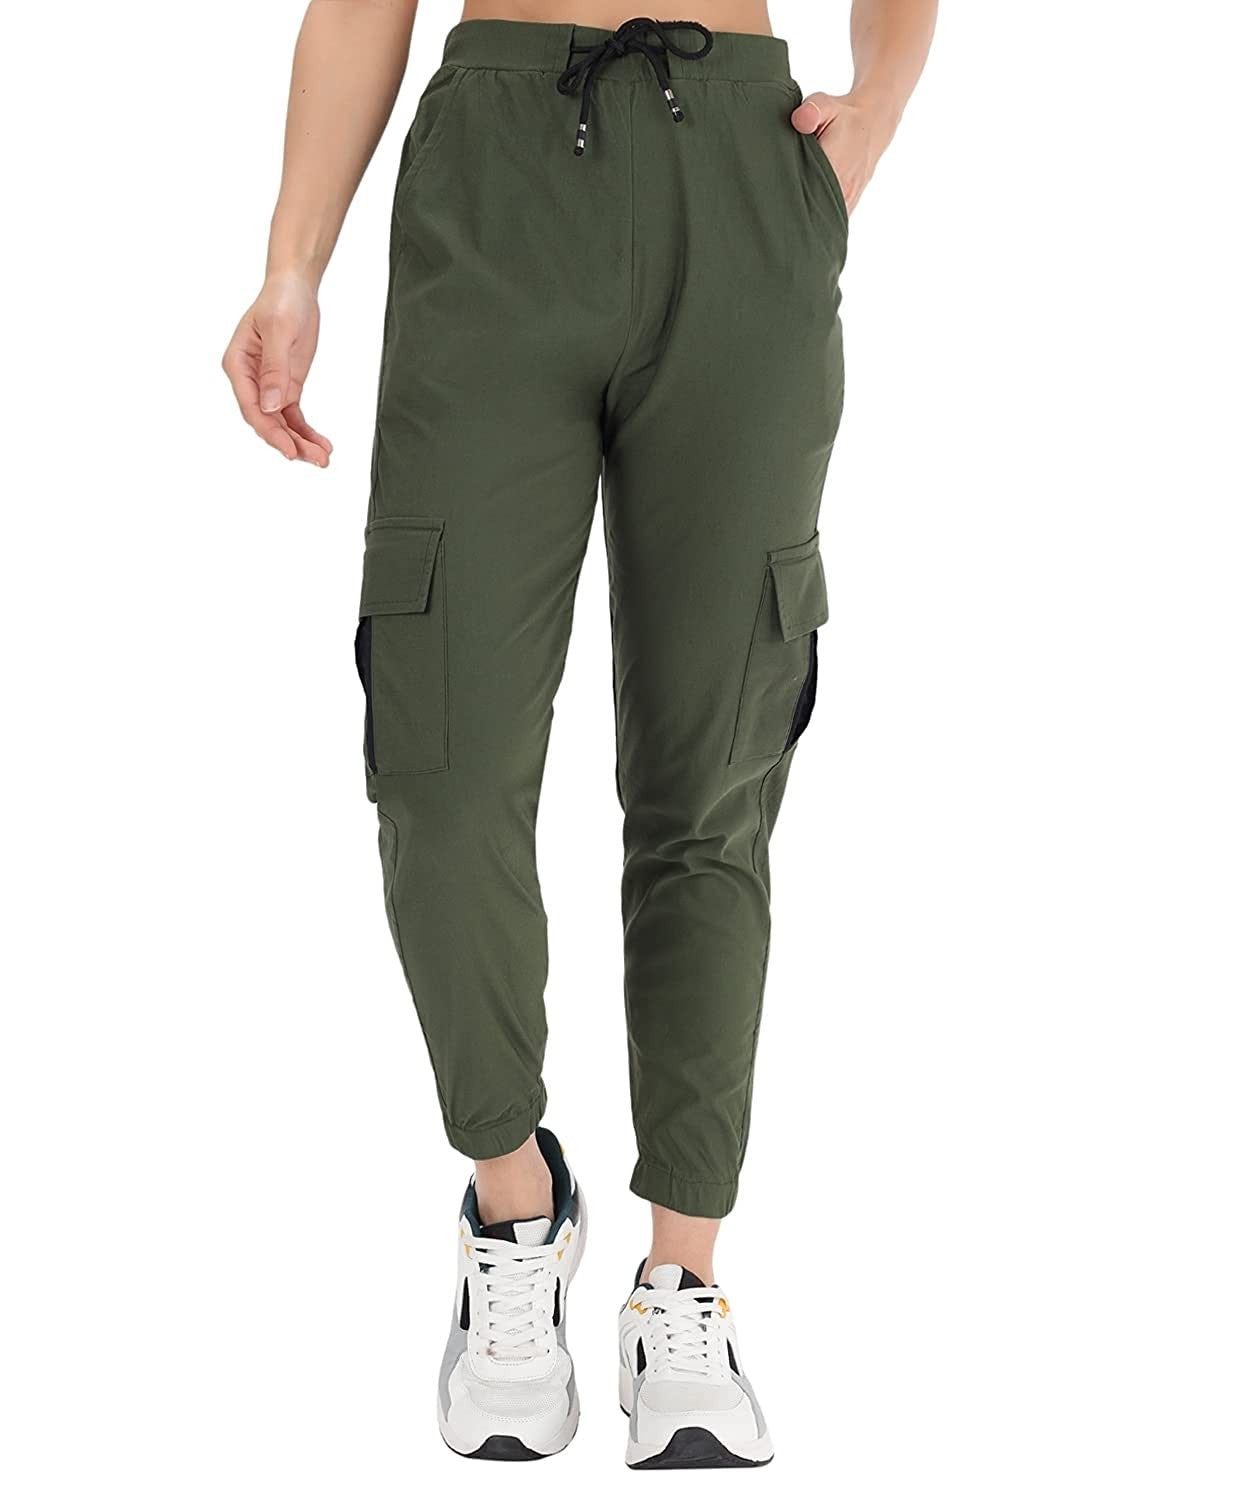 The model in the image is wearing Army Green Double Pocket Corgo Pant from Alice Milan. Crafted with the finest materials and impeccable attention to detail, the Cargo Pant looks premium, trendy, luxurious and offers unparalleled comfort. It’s a perfect clothing option for loungewear, resort wear, party wear or for an airport look. The woman in the image looks happy, and confident with her style statement putting a happy smile on her face.